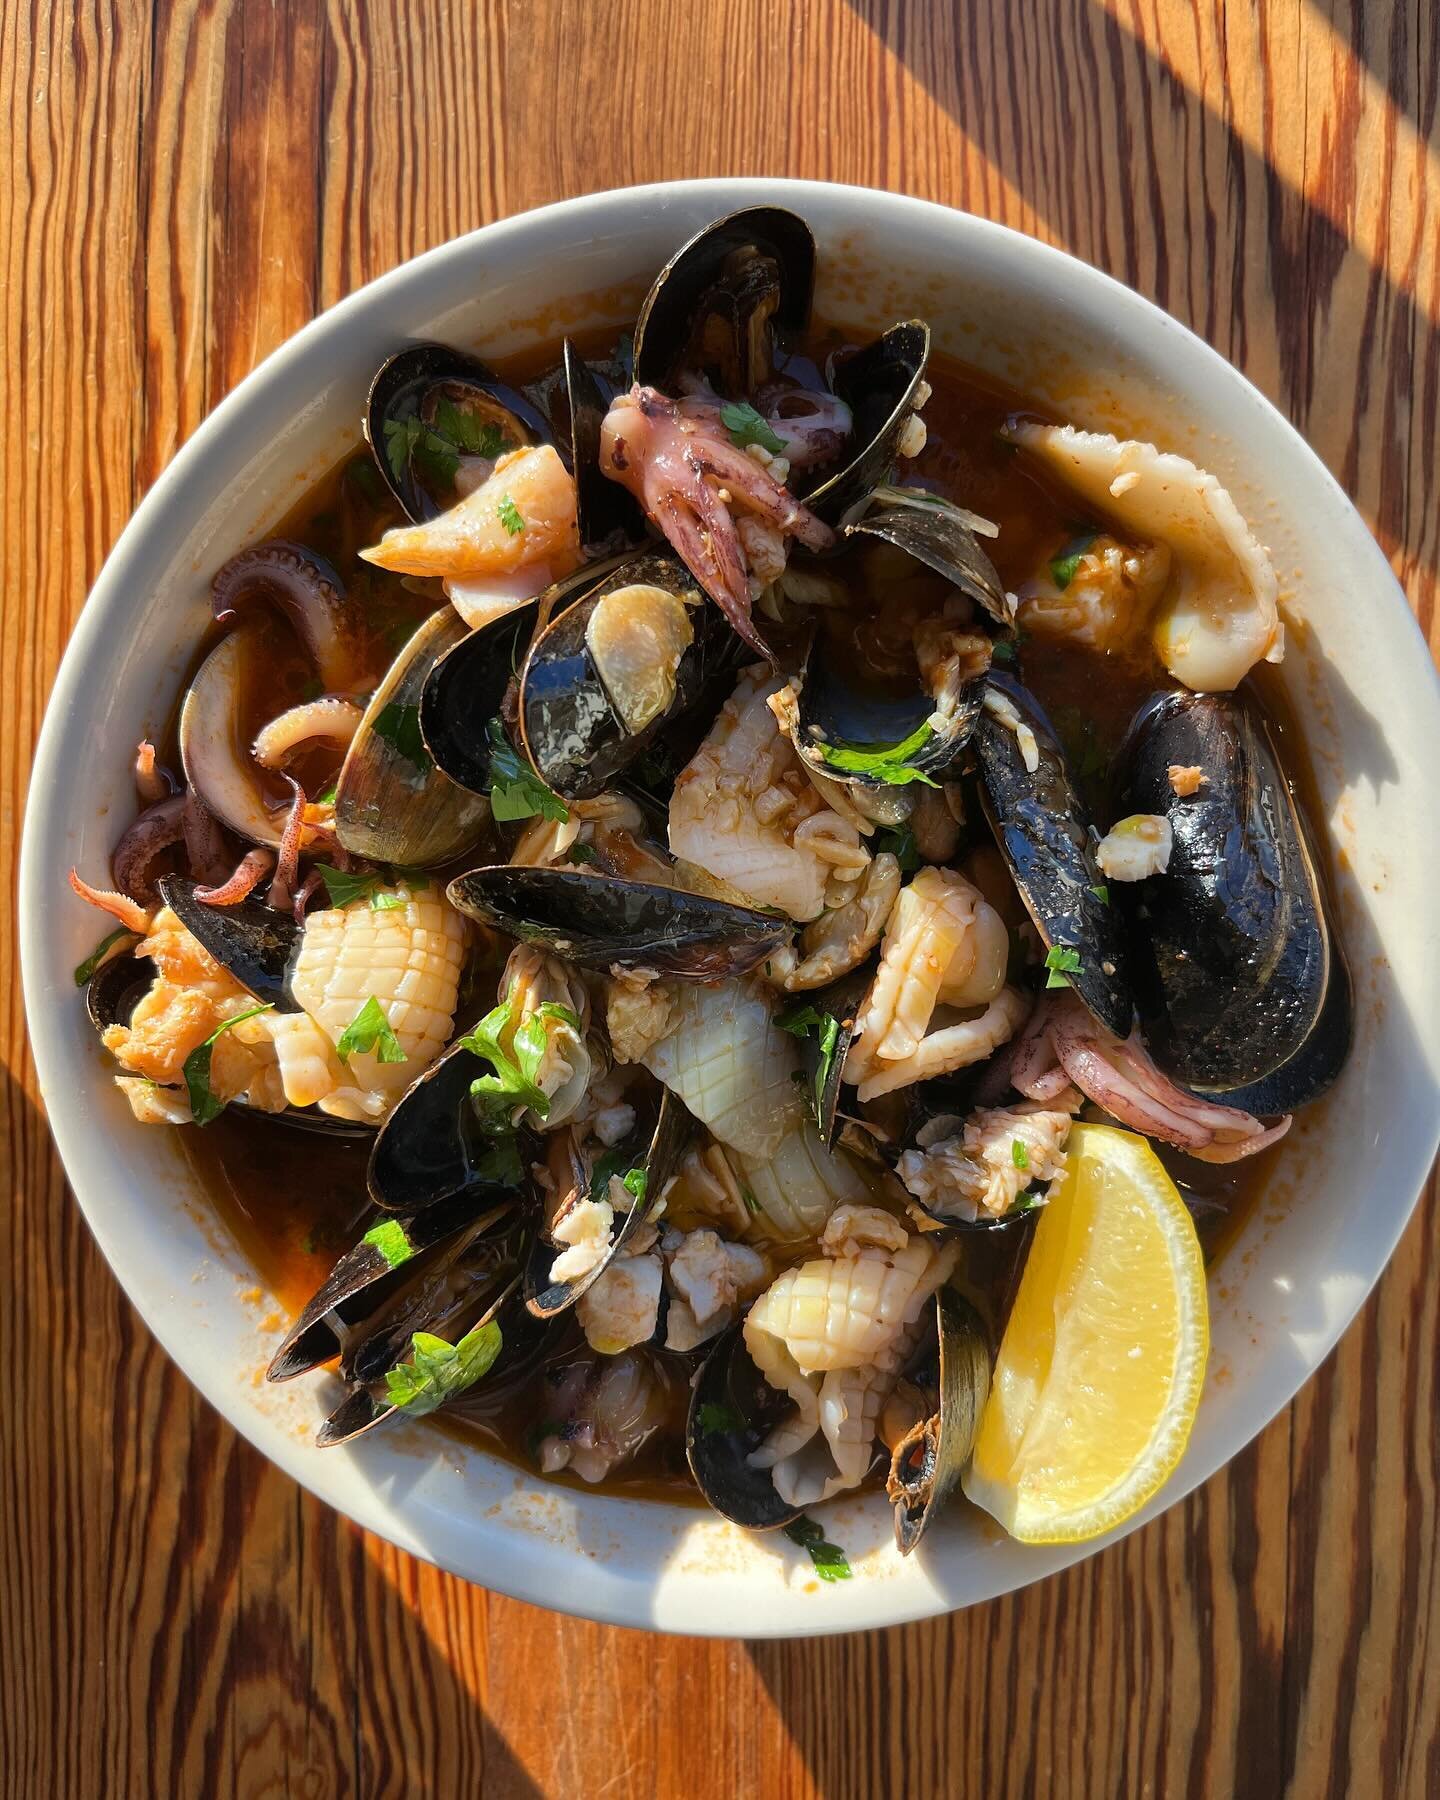 Captain Roger&rsquo;s Cioppino, a full flavored shellfish broth with clams, mussels, oysters, squid and cod. This one&rsquo;s gonna warm your bones. See you at 5! You should also try one of our new cocktails 😉.
.
.
.
#cioppino #soup #shellfish #bone